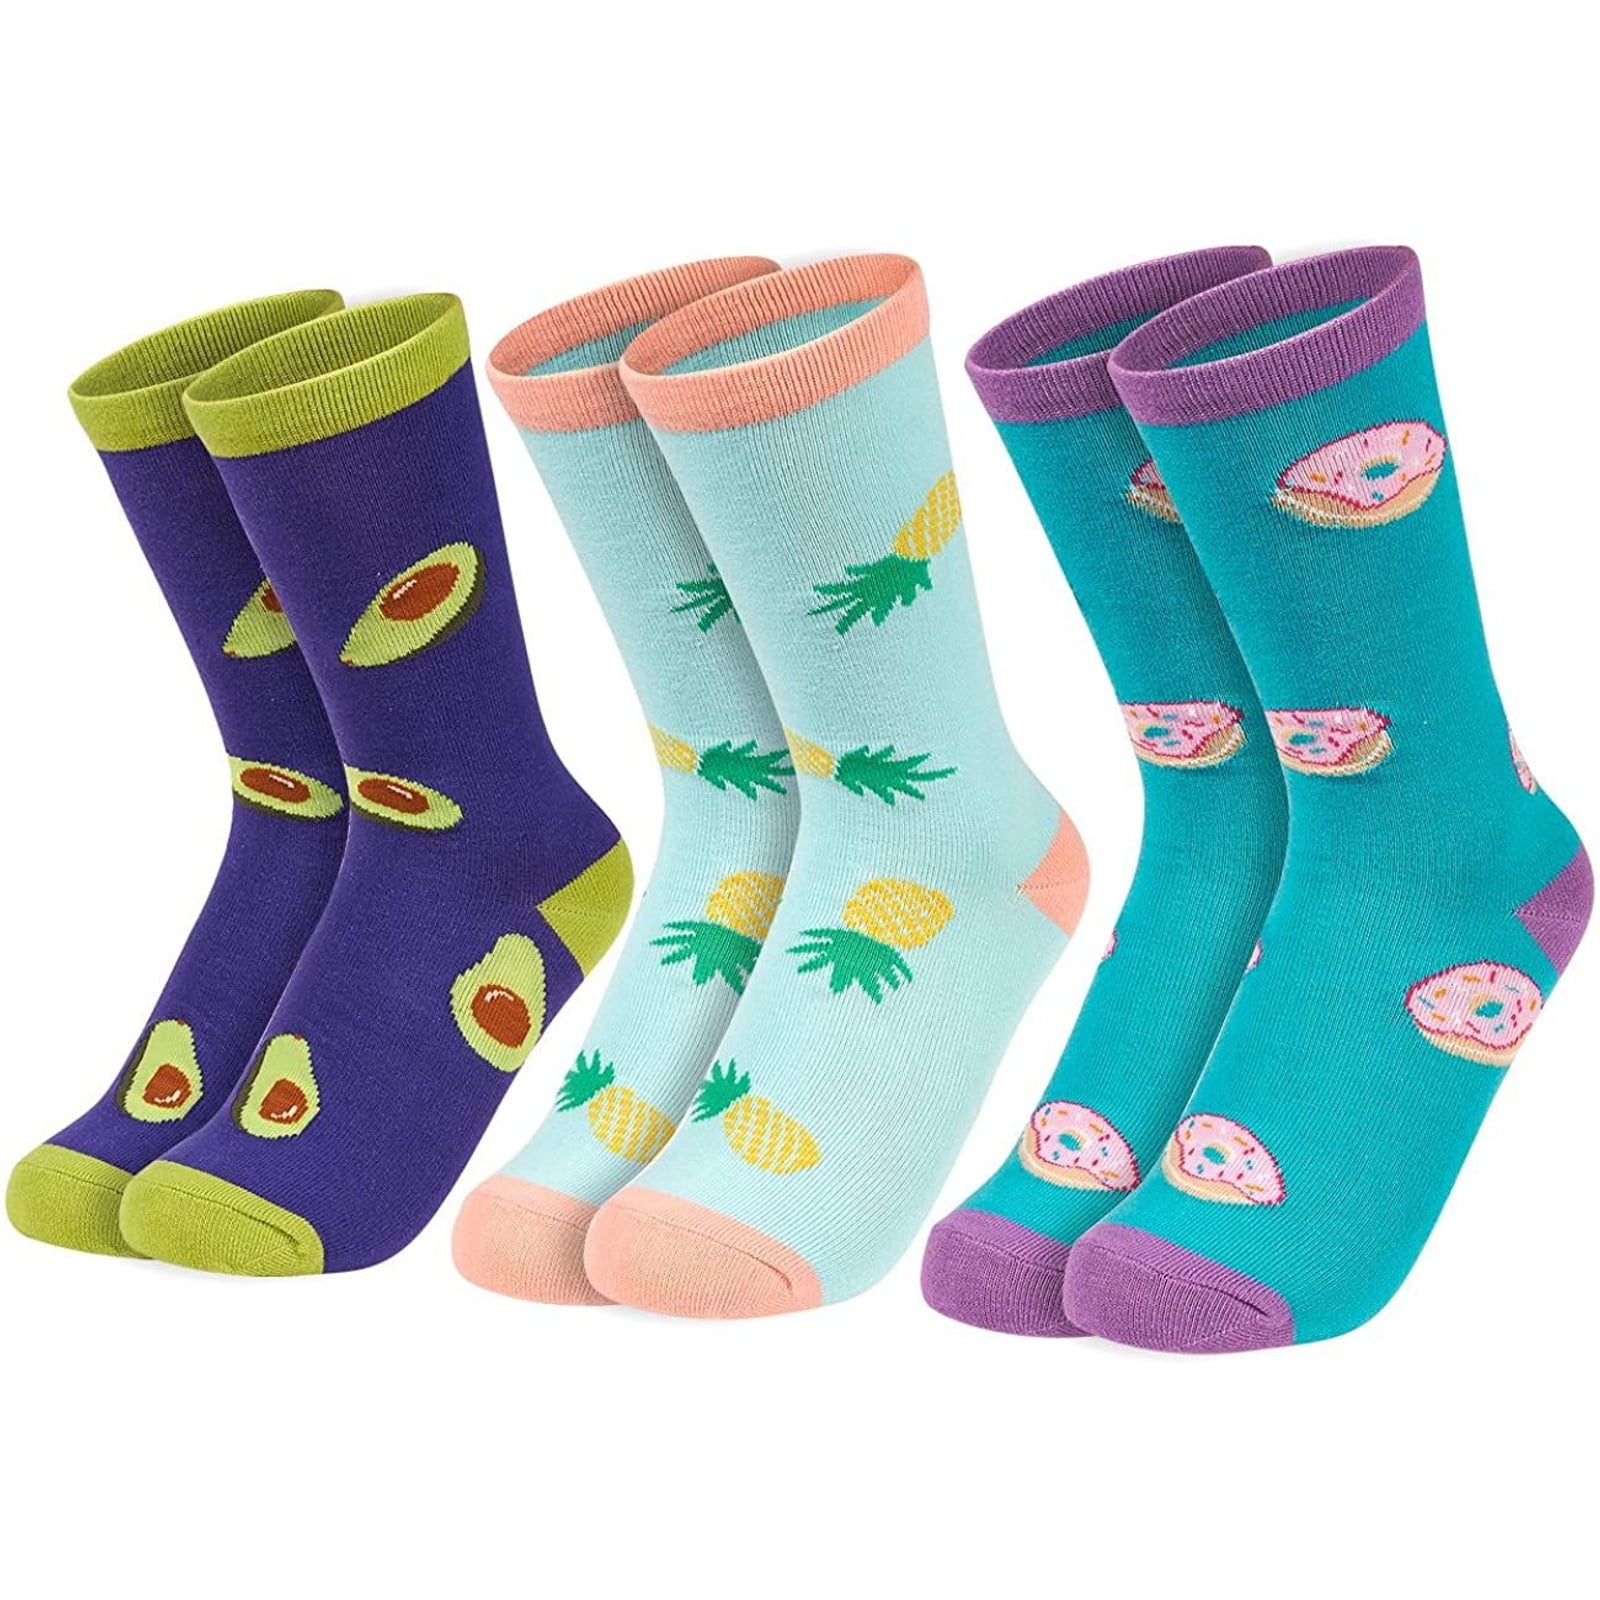 Funny Pineapple Teeth Pickle Avocado Gifts Zmart Pineapple Teeth Pickle Avocado Ankle Low Cut Socks 2 Pack